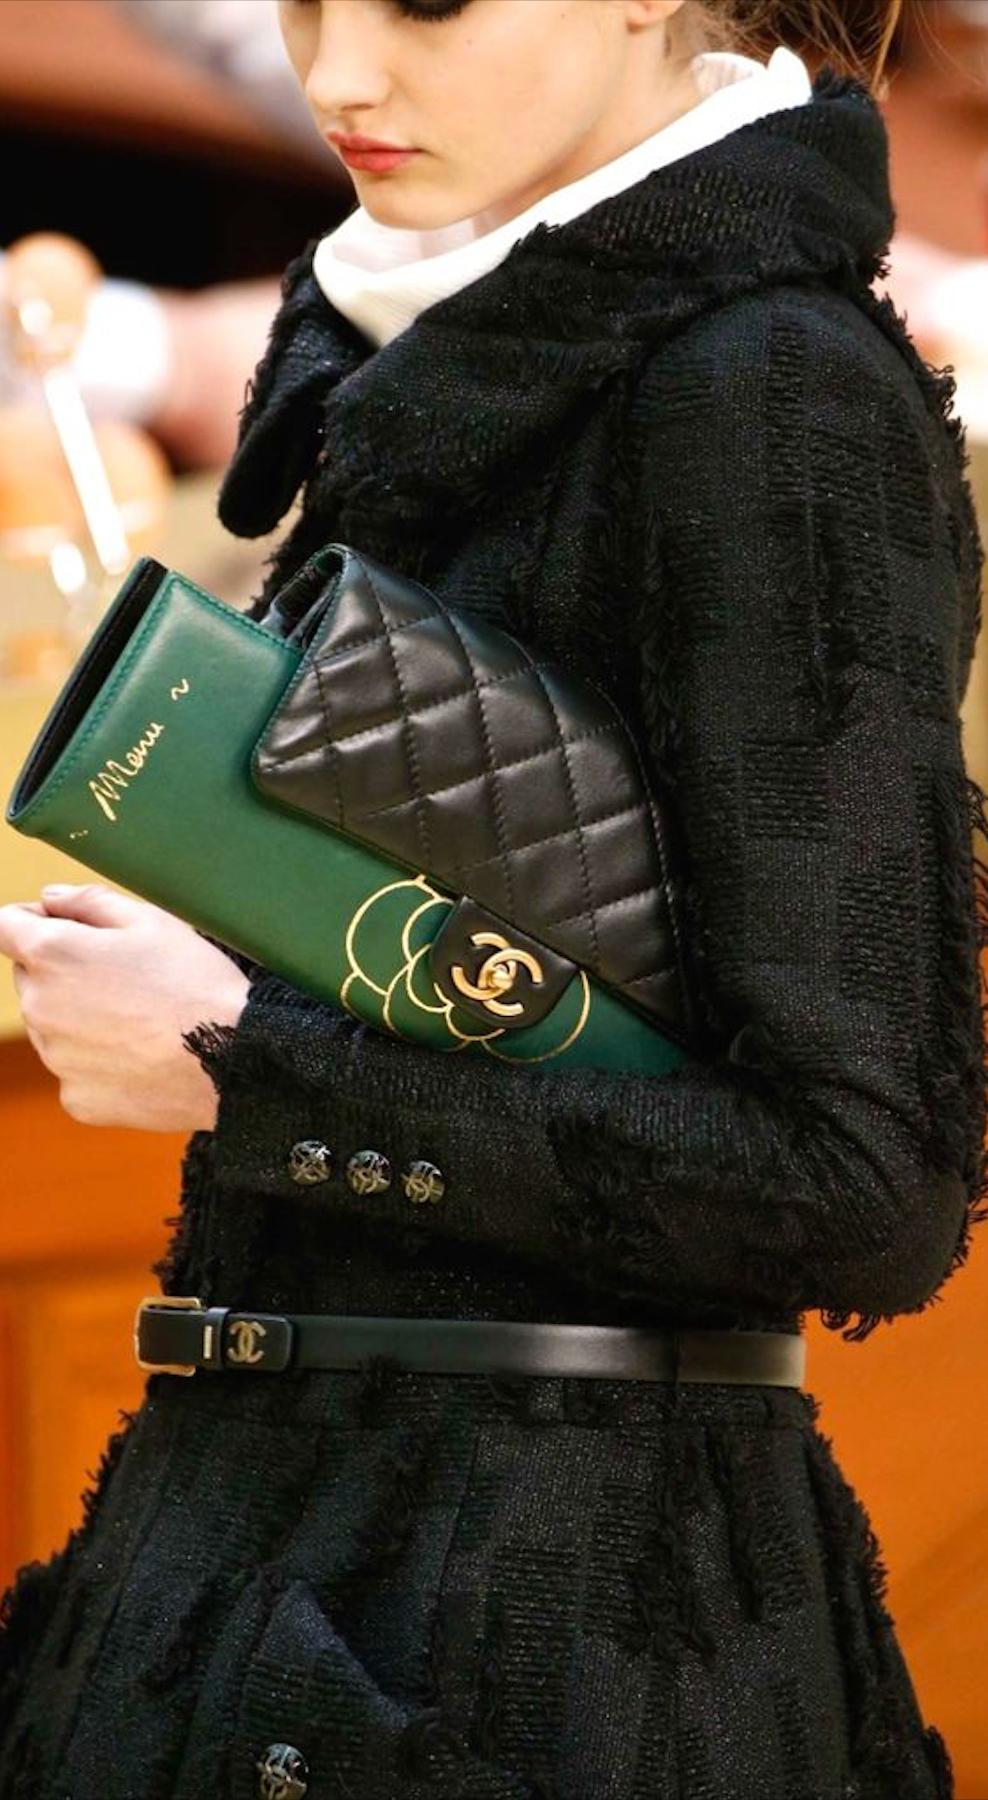 Green calfskin and quilted diamond stitch Chanel Menu clutch flap

Year: 2015
Gold hardware
Classic interlocking cc clasp
Interior large pocket
Two additional interior pockets
Interwoven chain
Can be carried as a flap or clutch
6.5” H x 15” W x 2”